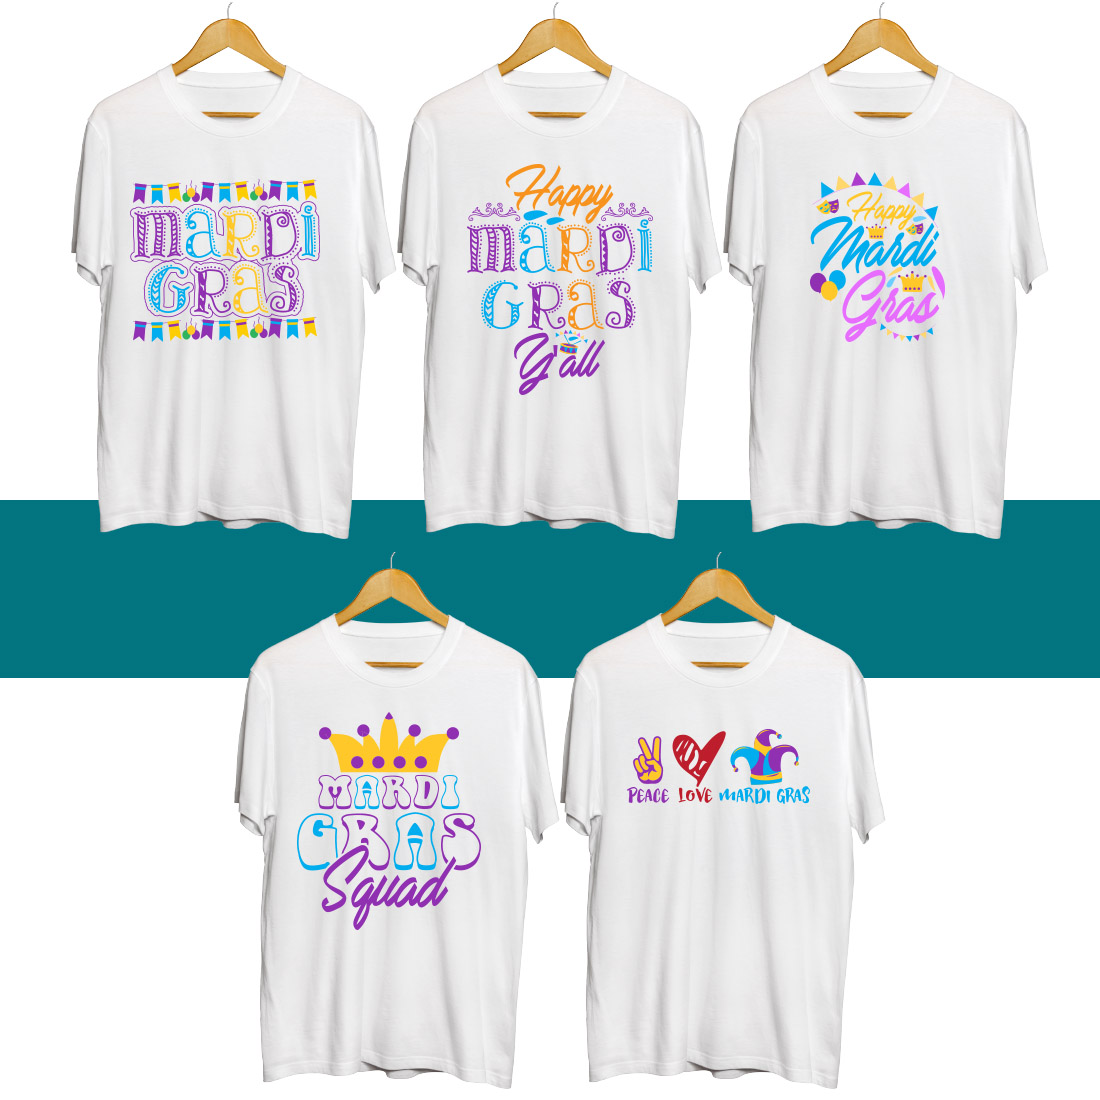 Group of t - shirts that say happy mardi gras.